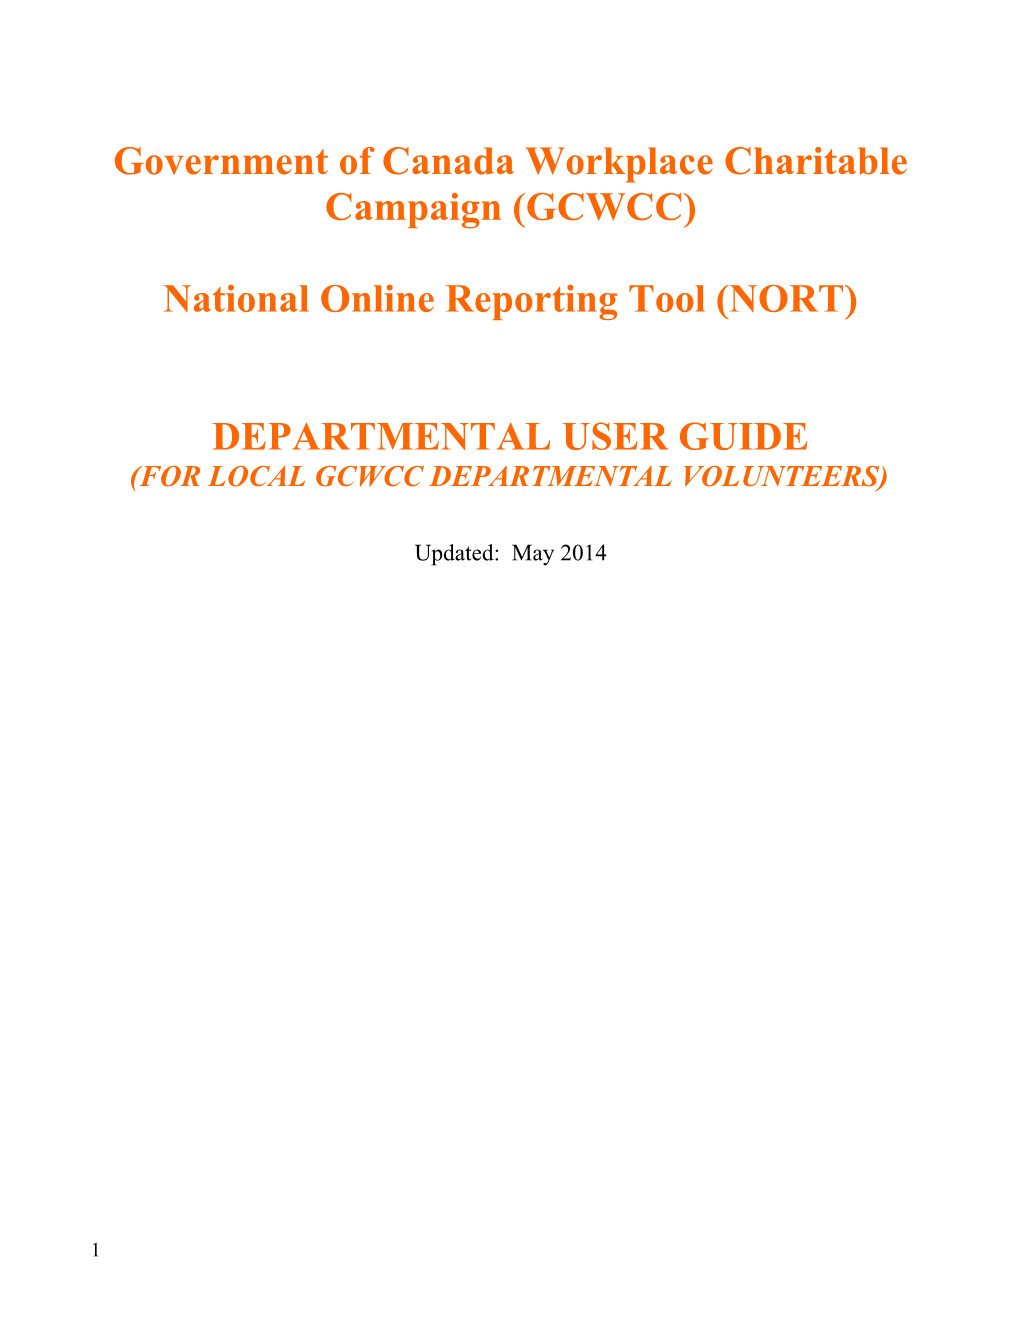 Government of Canada Workplace Charitable Campaign (GCWCC)